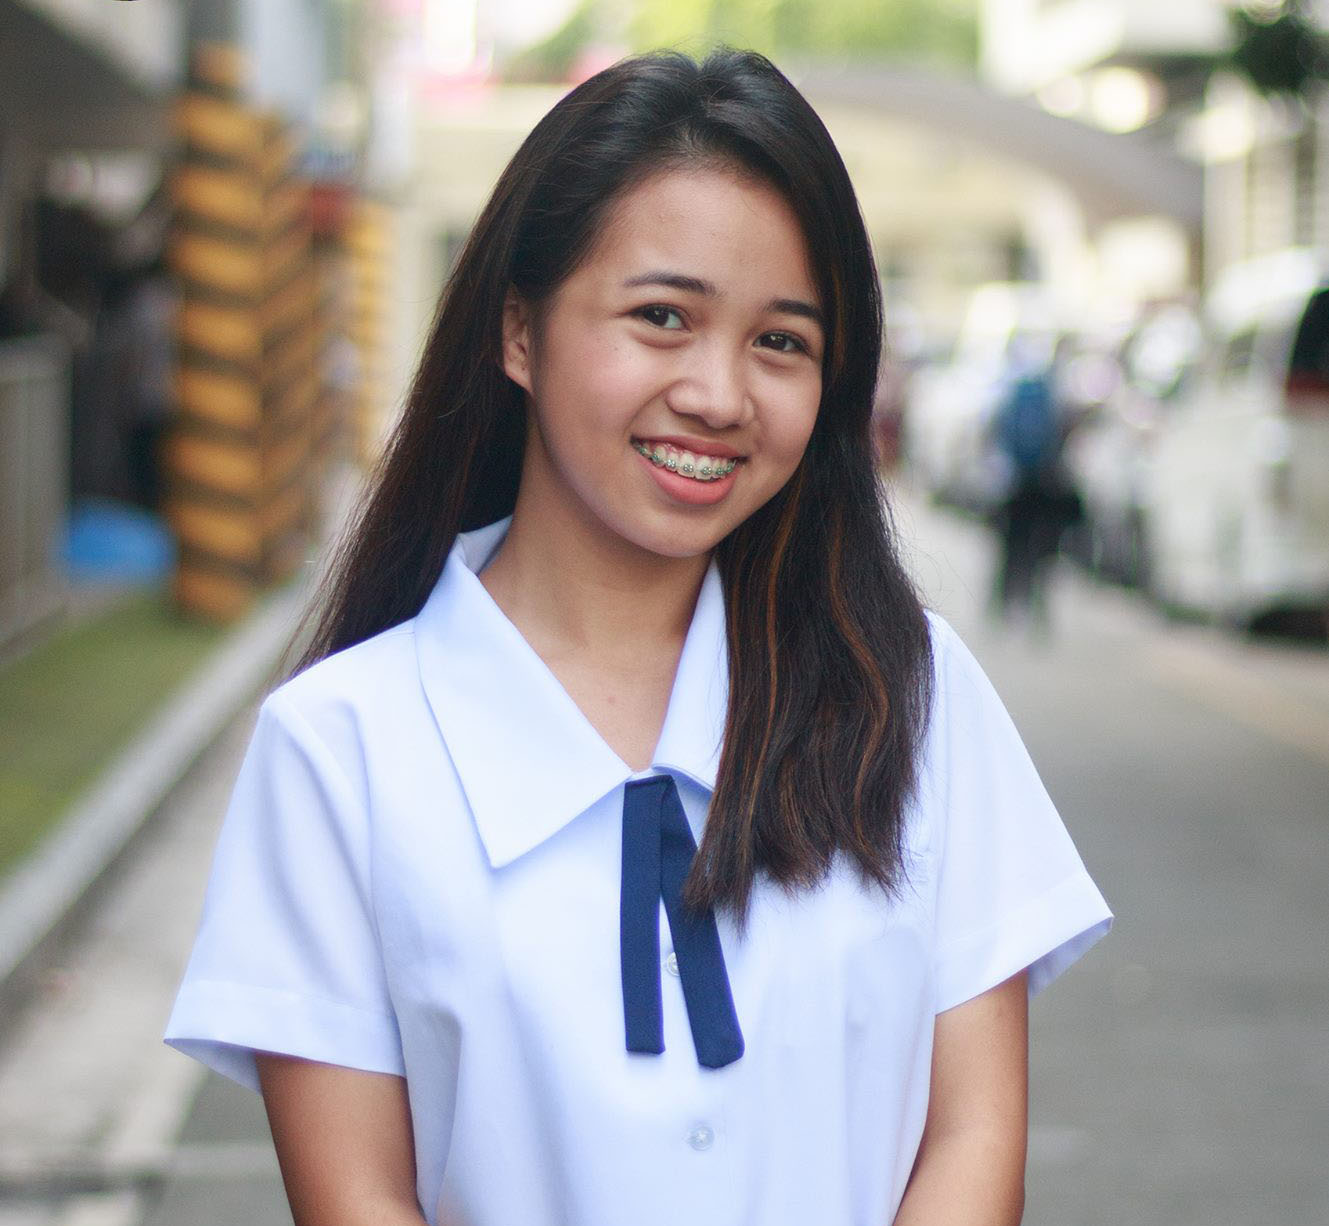 Artlet freshman succumbs to cancer at 19